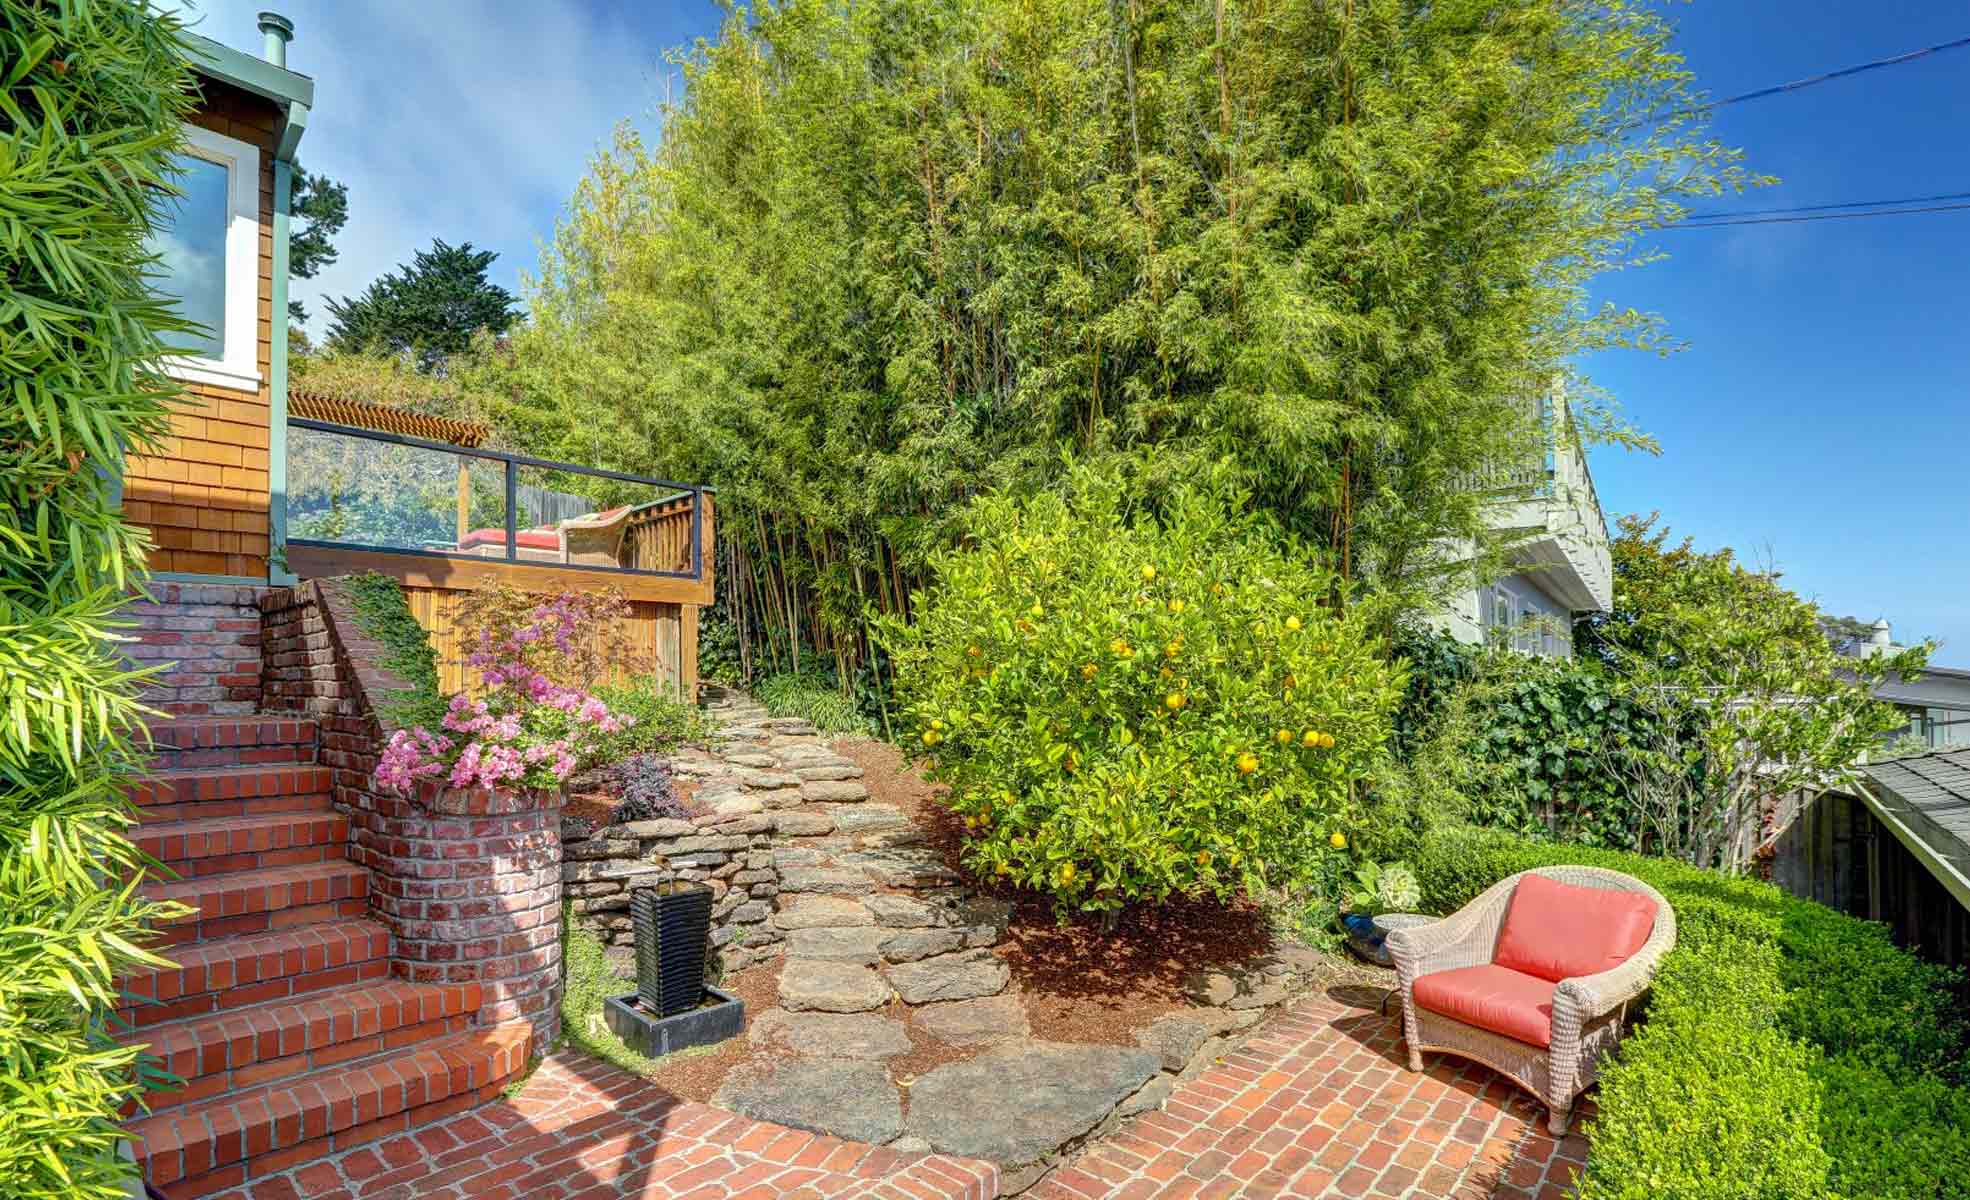 Mature landscaping, sausalito, great weather